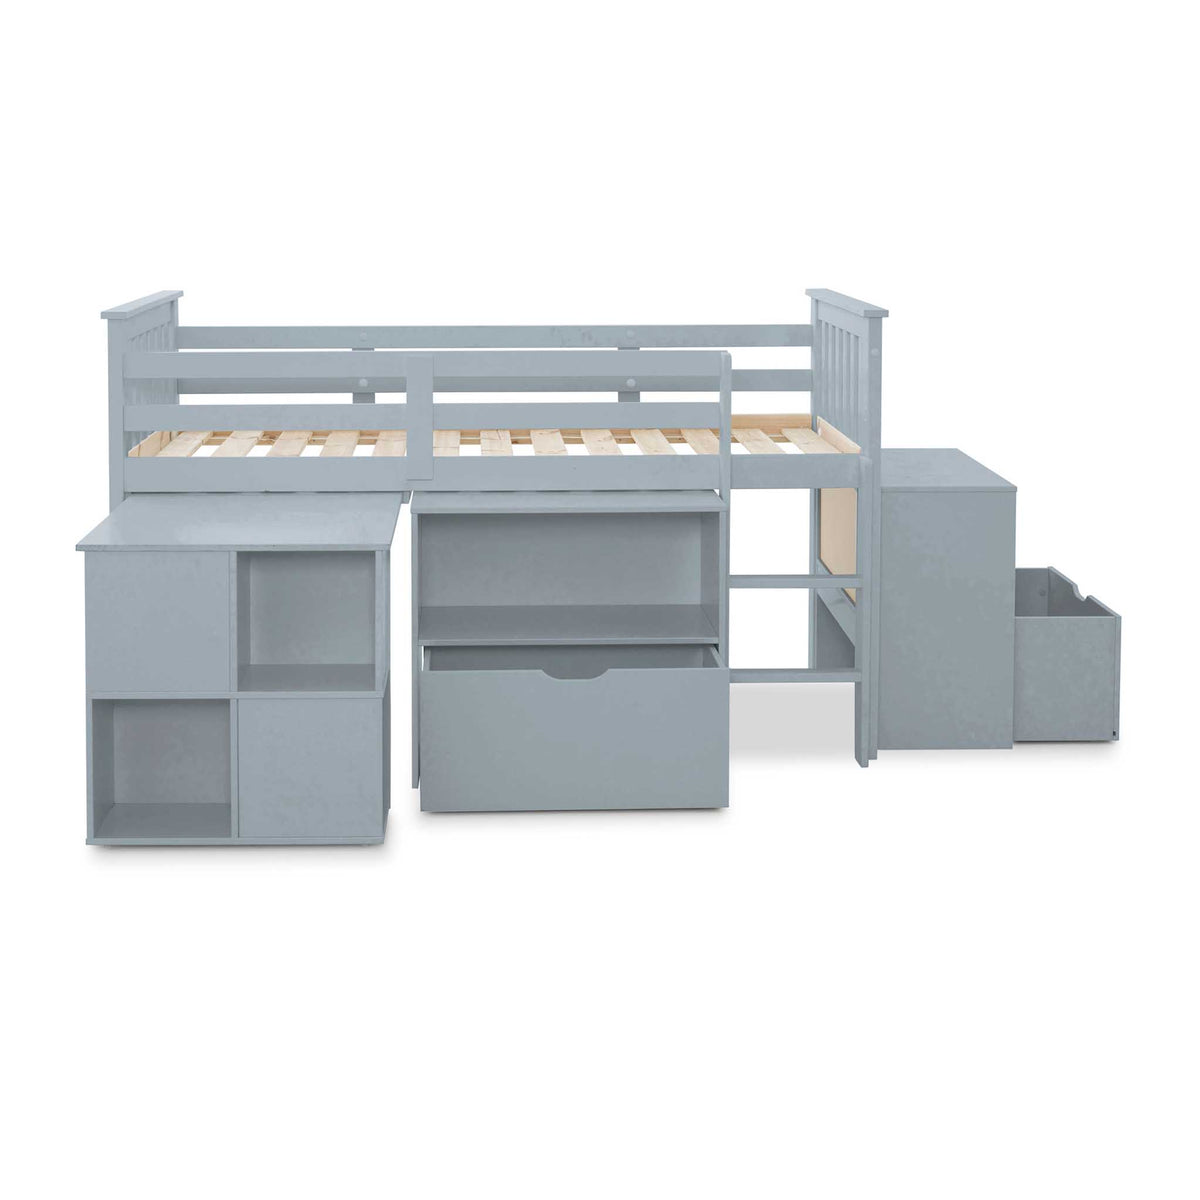 side view of the Huckerby Grey Childrens Sleep Station Storage Bed with pull out storage boxes